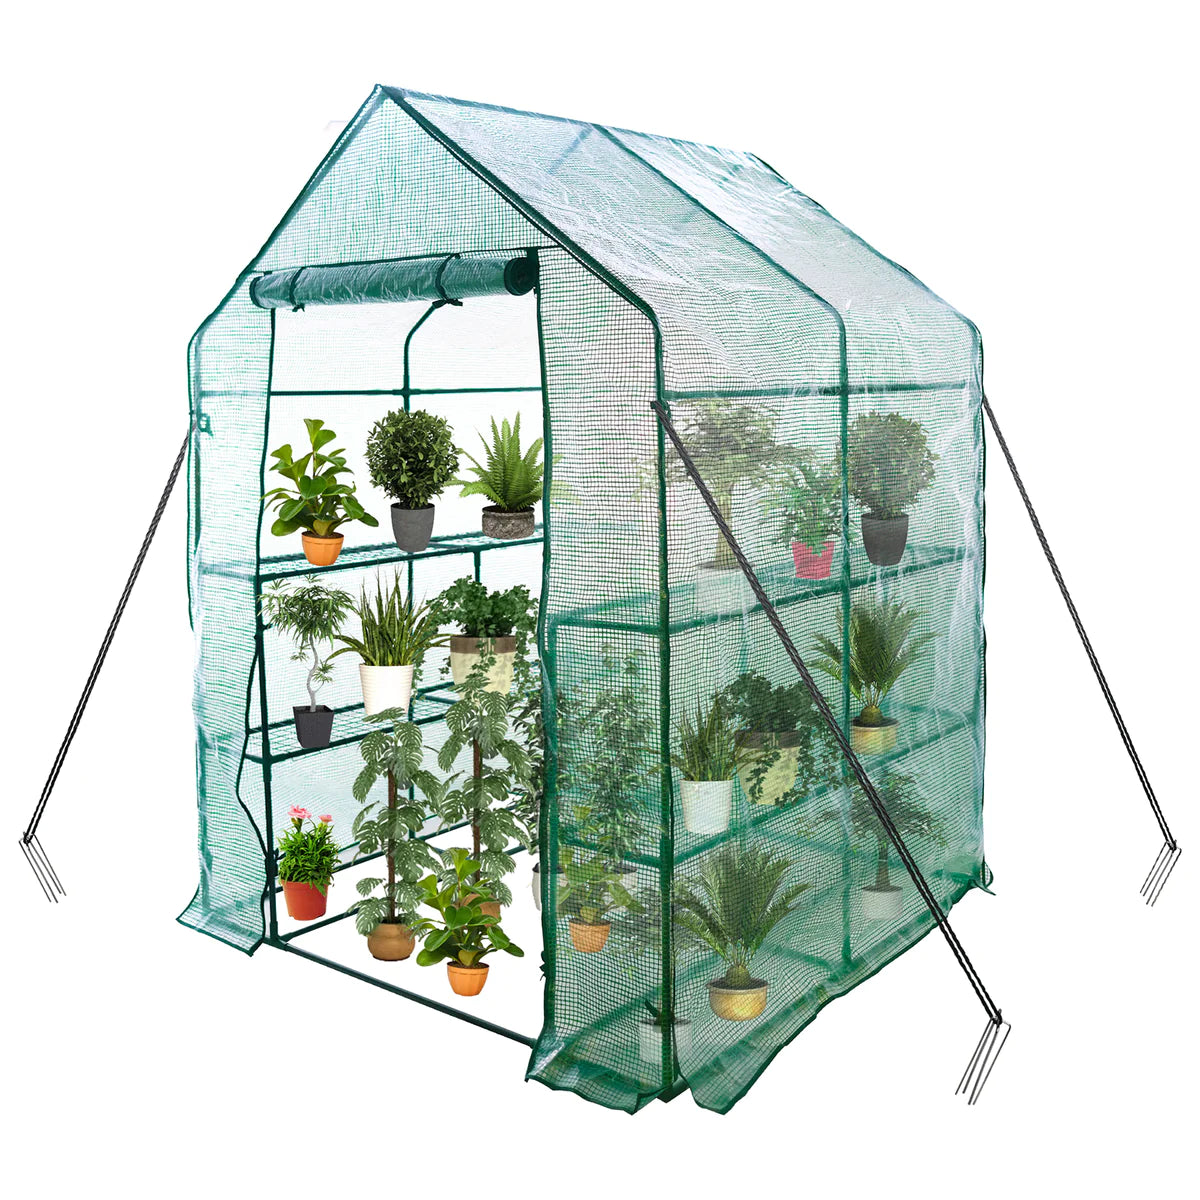 8 Shelves Walk-in Greenhouse Metal Shelf with Cover Pot Available